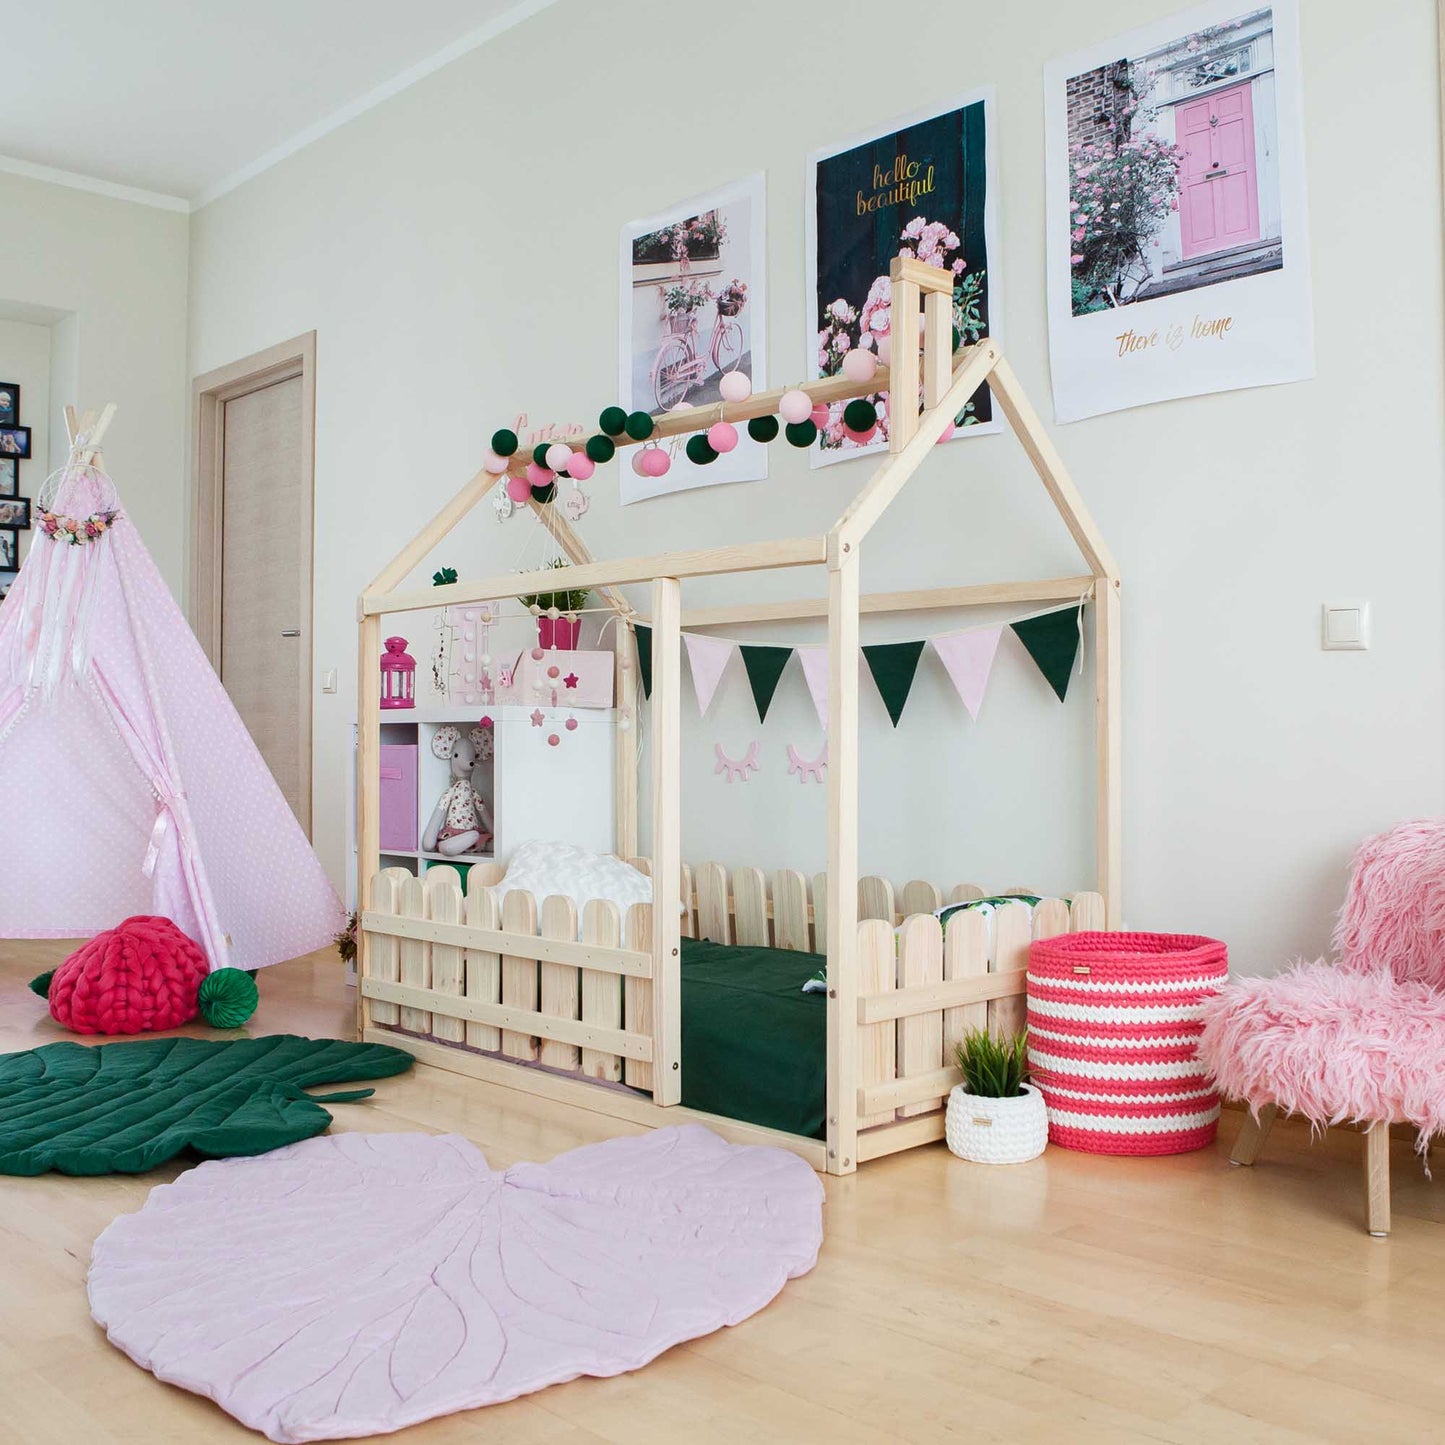 A girl's room with a Platform house bed with a picket fence designed as a teepee.